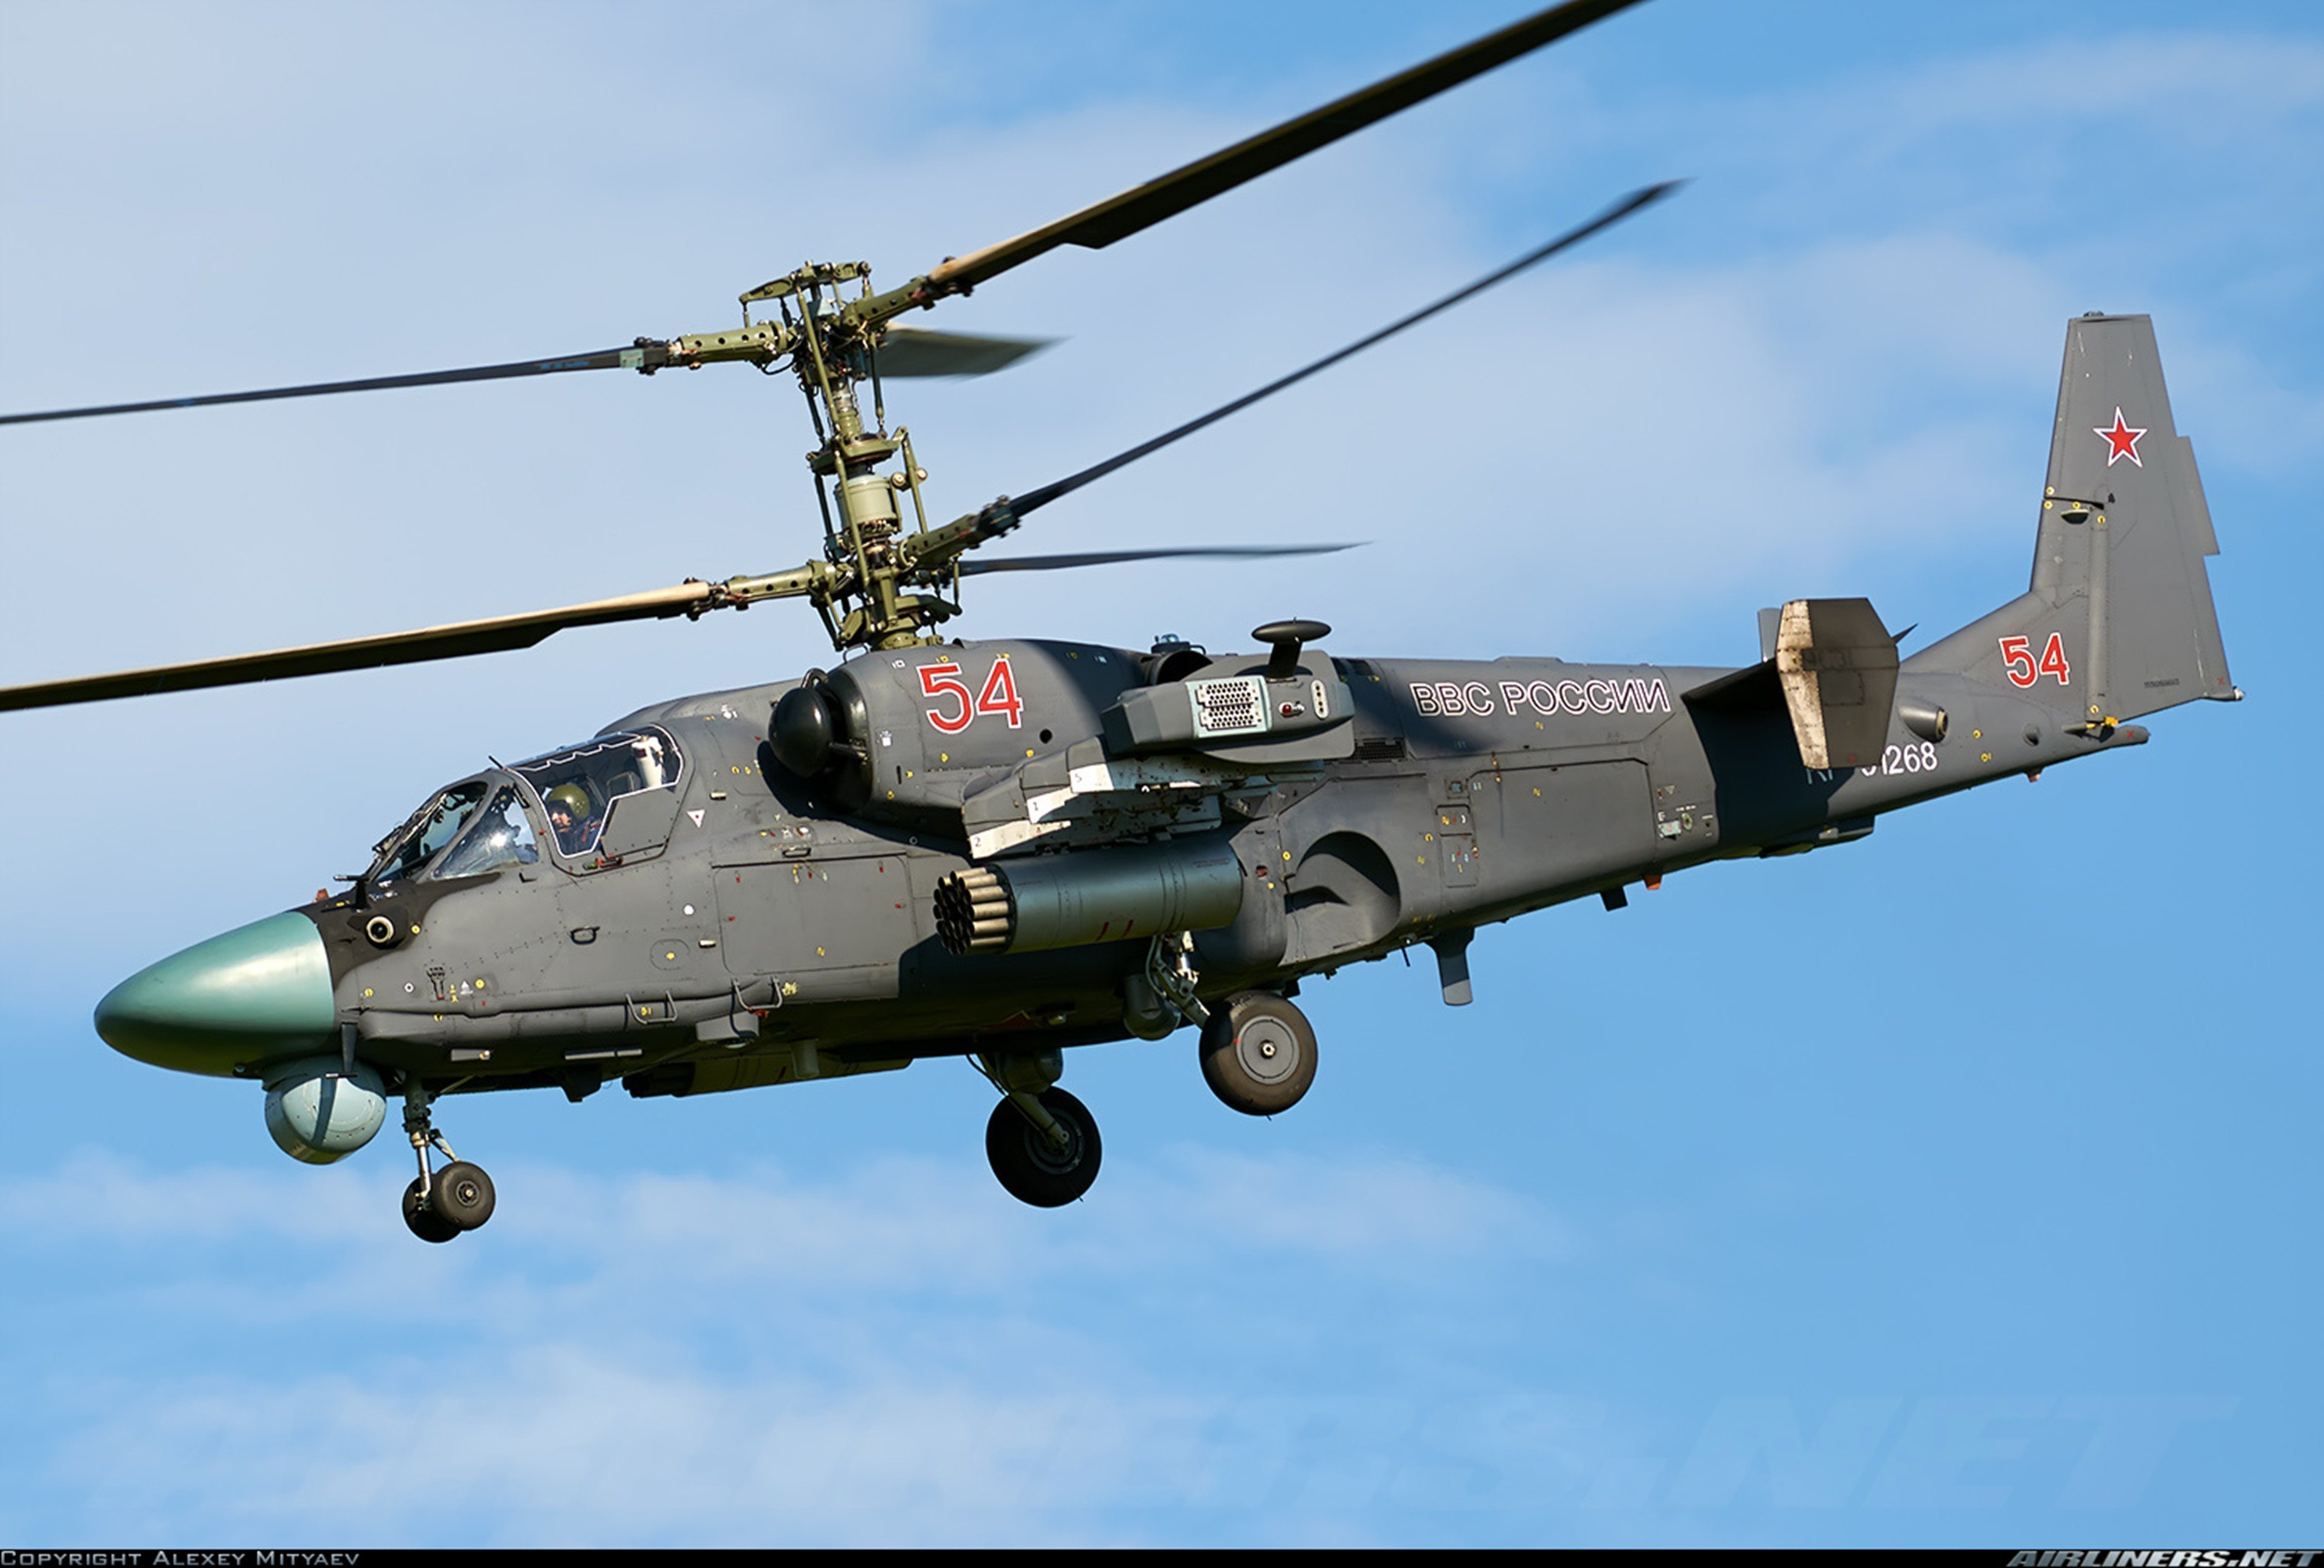 kamov, Ka 52, Alligator, Russian, Red, Star, Russia, Helicopter, Aircraft, Attack, Military, Army Wallpaper